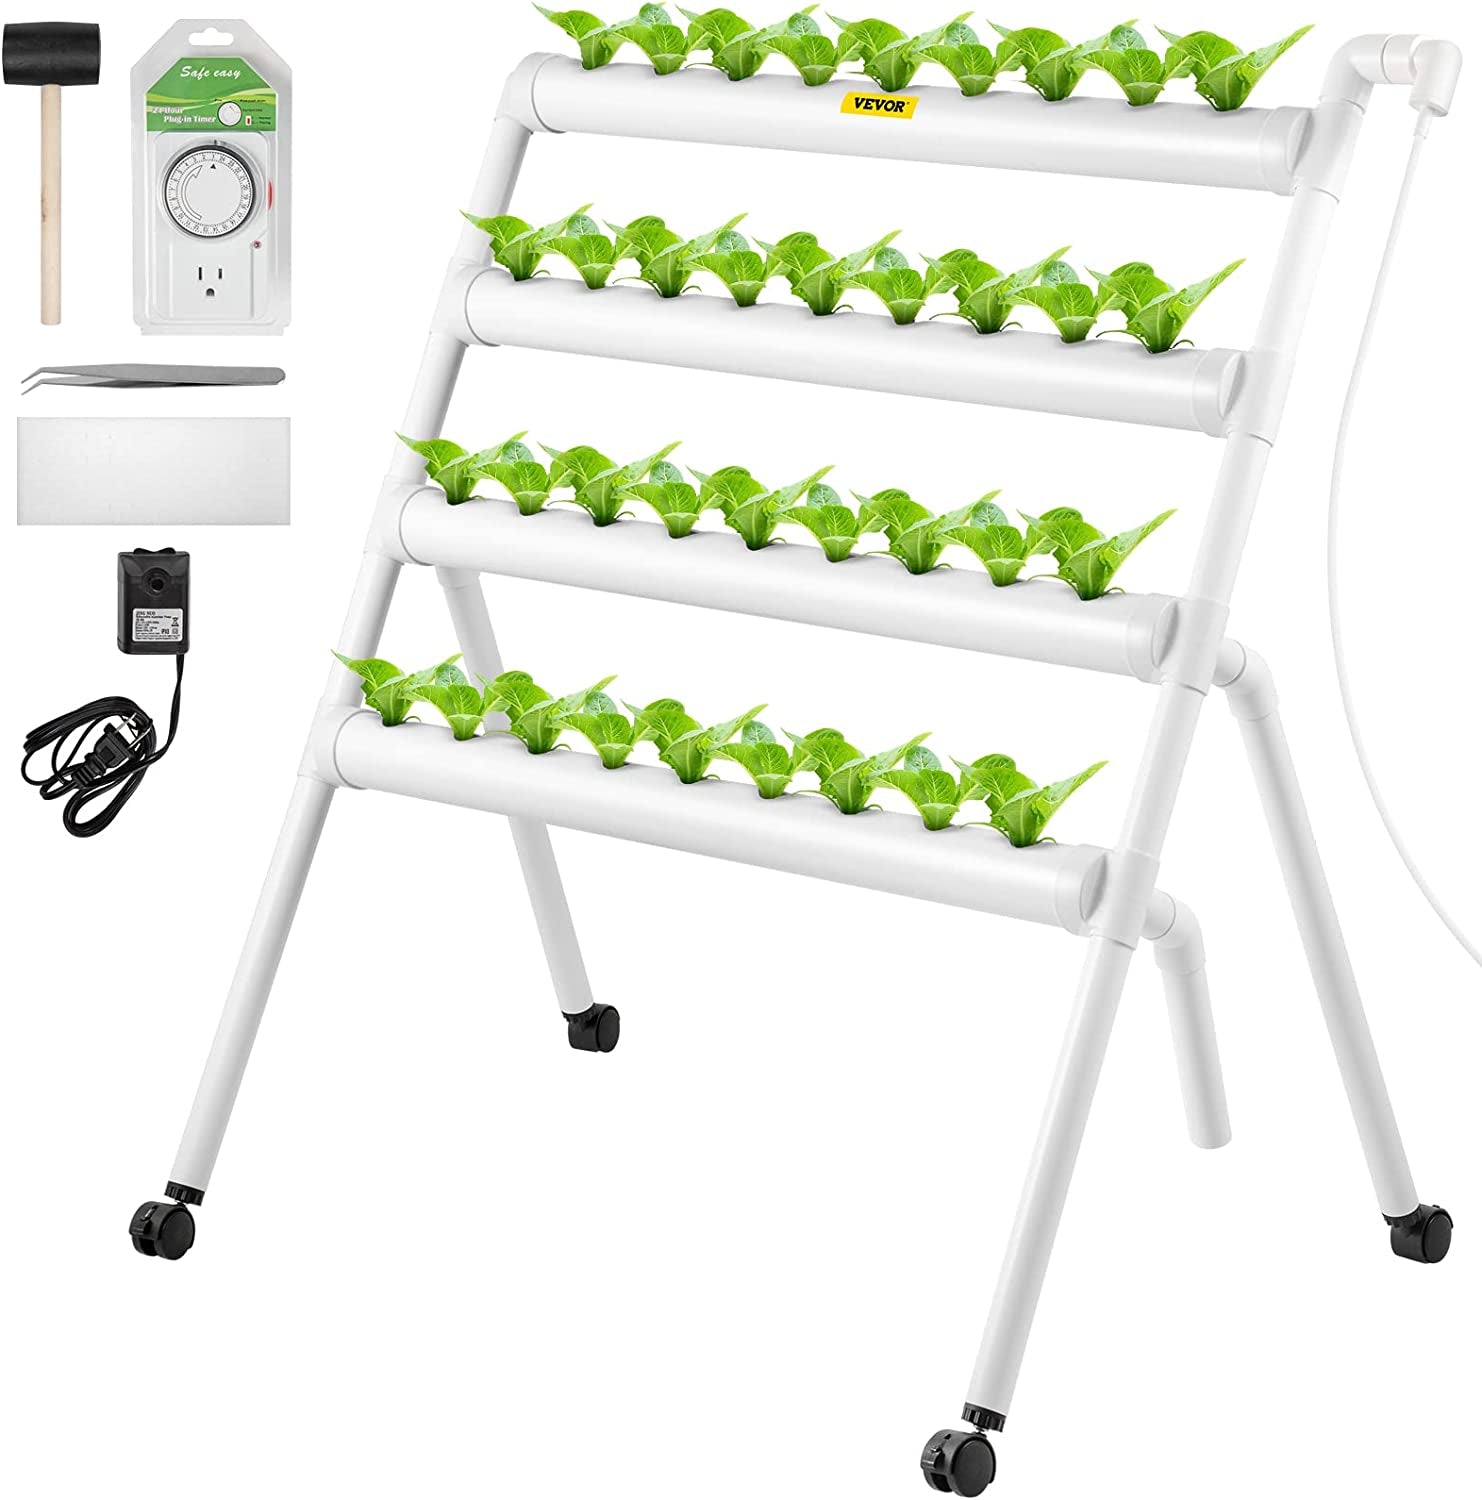 Hydroponics Growing System, 36 Sites 4 Food-Grade PVC-U Pipes, 4 Layers Indoor Planting Kit with Water Pump, Timer, Nest Basket, Sponge for Fruits, Vegetables, Herb, White